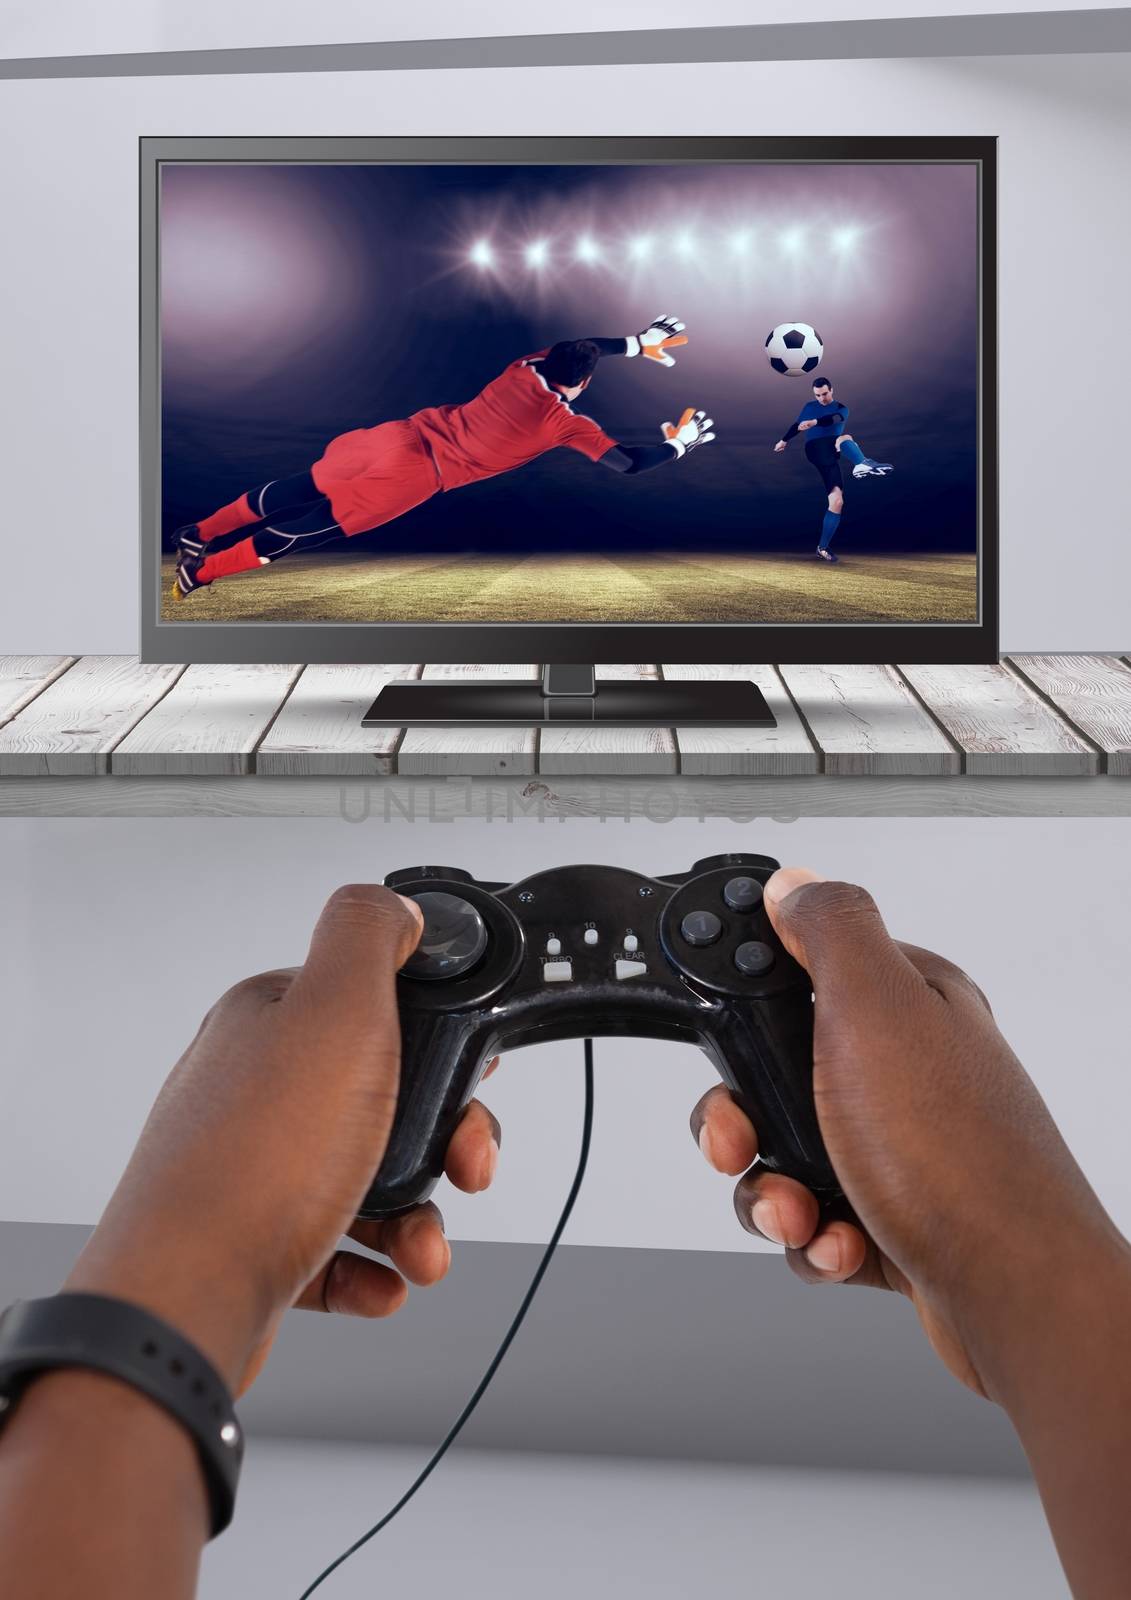 Digital composite of Playing soccer computer game with controller in hands